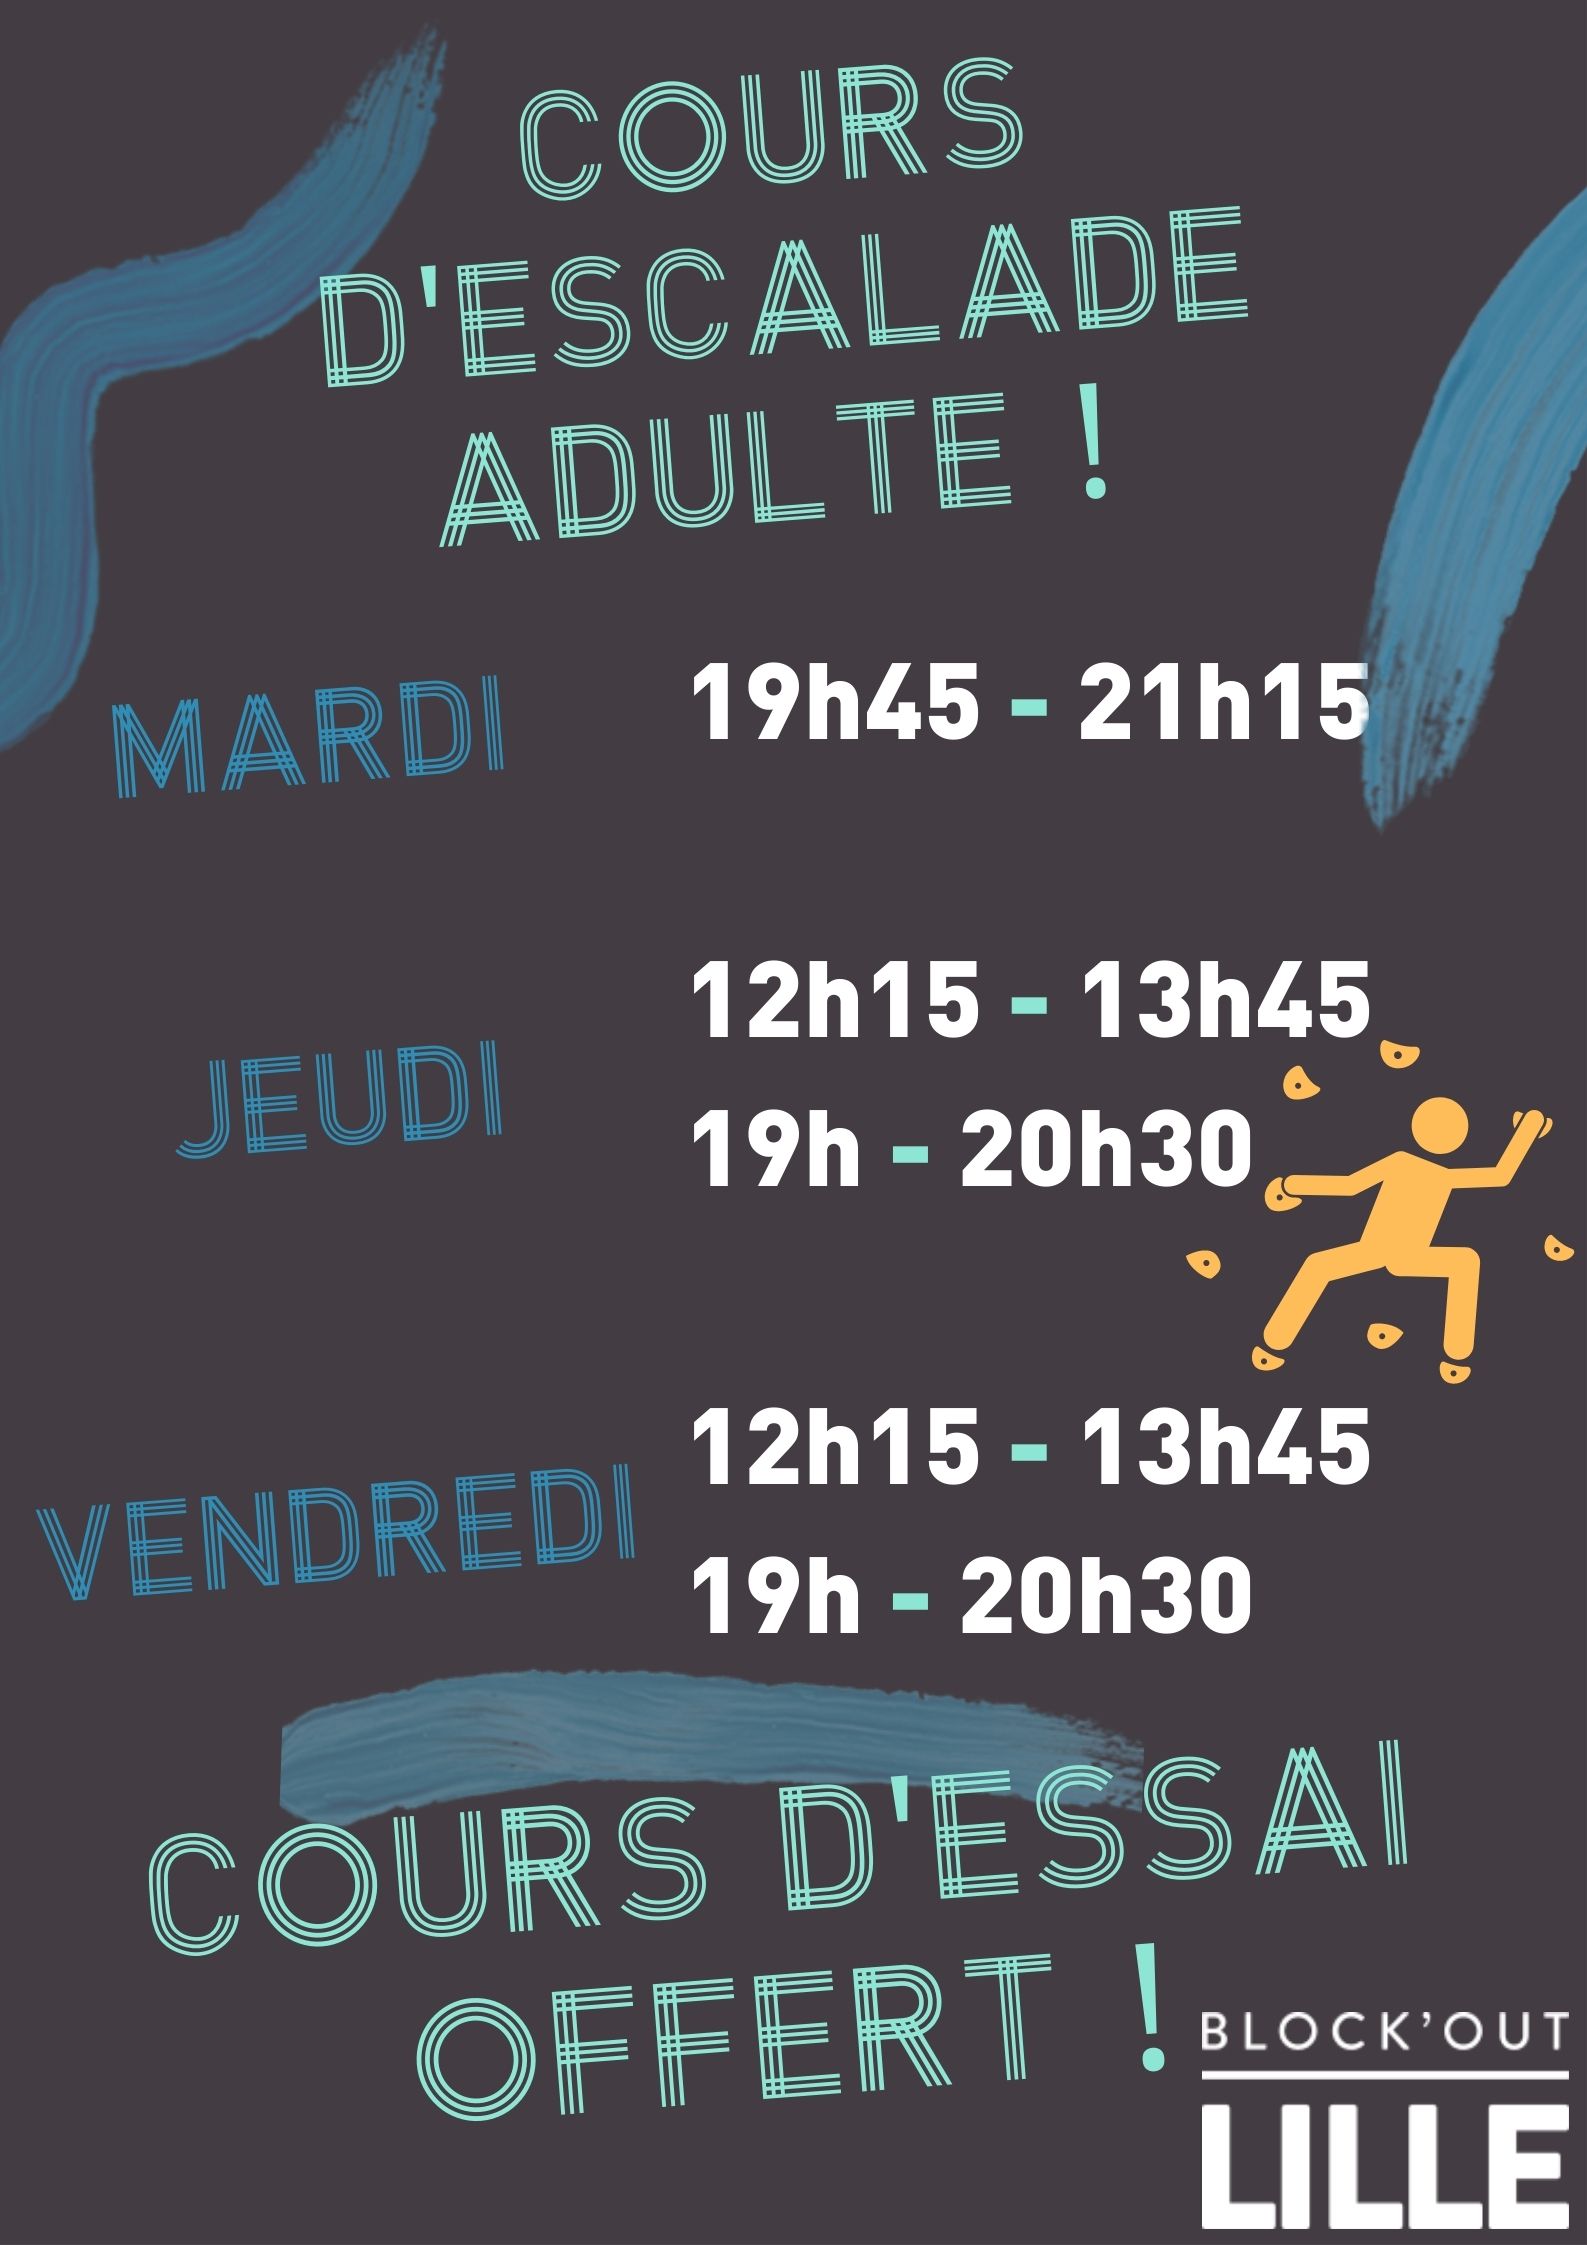 [B'O COURS ADULTES]